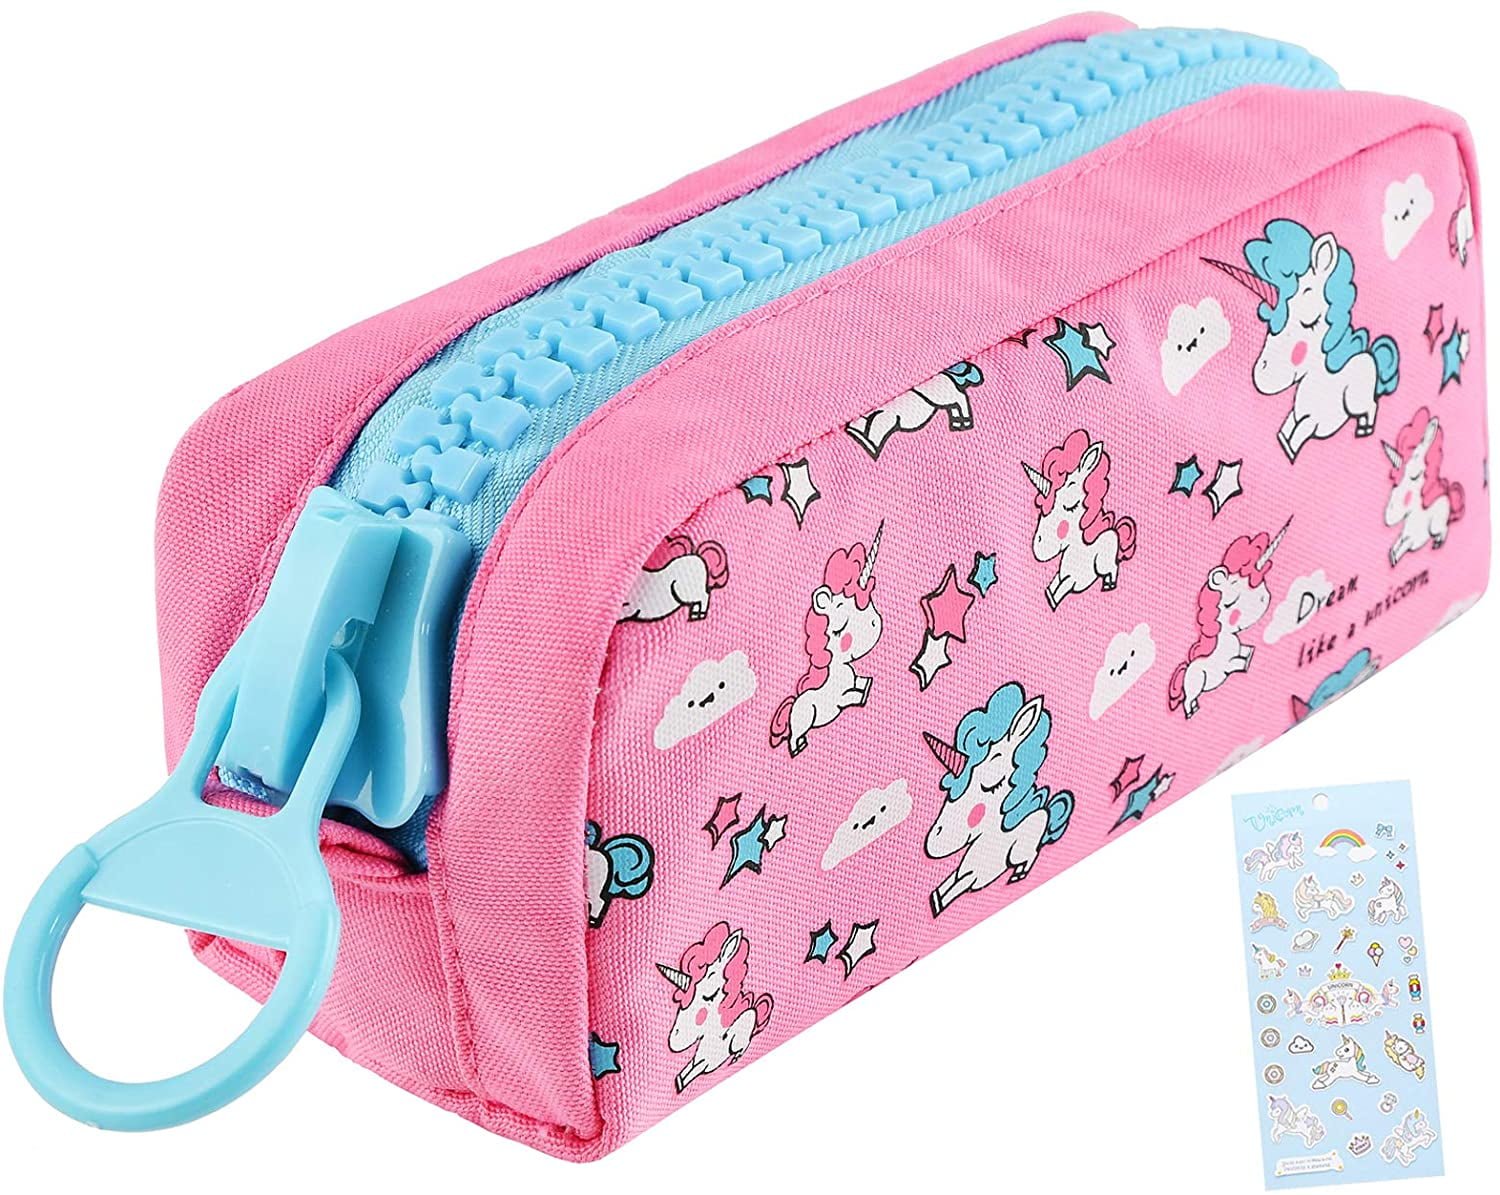 JOJOOKIDS Pencil Case for Girls | Unicorn Pencil Holder for Kids | Cute  Pencil Pouch Large Pencil Box | Pencil Bag with Compartments BPA Free